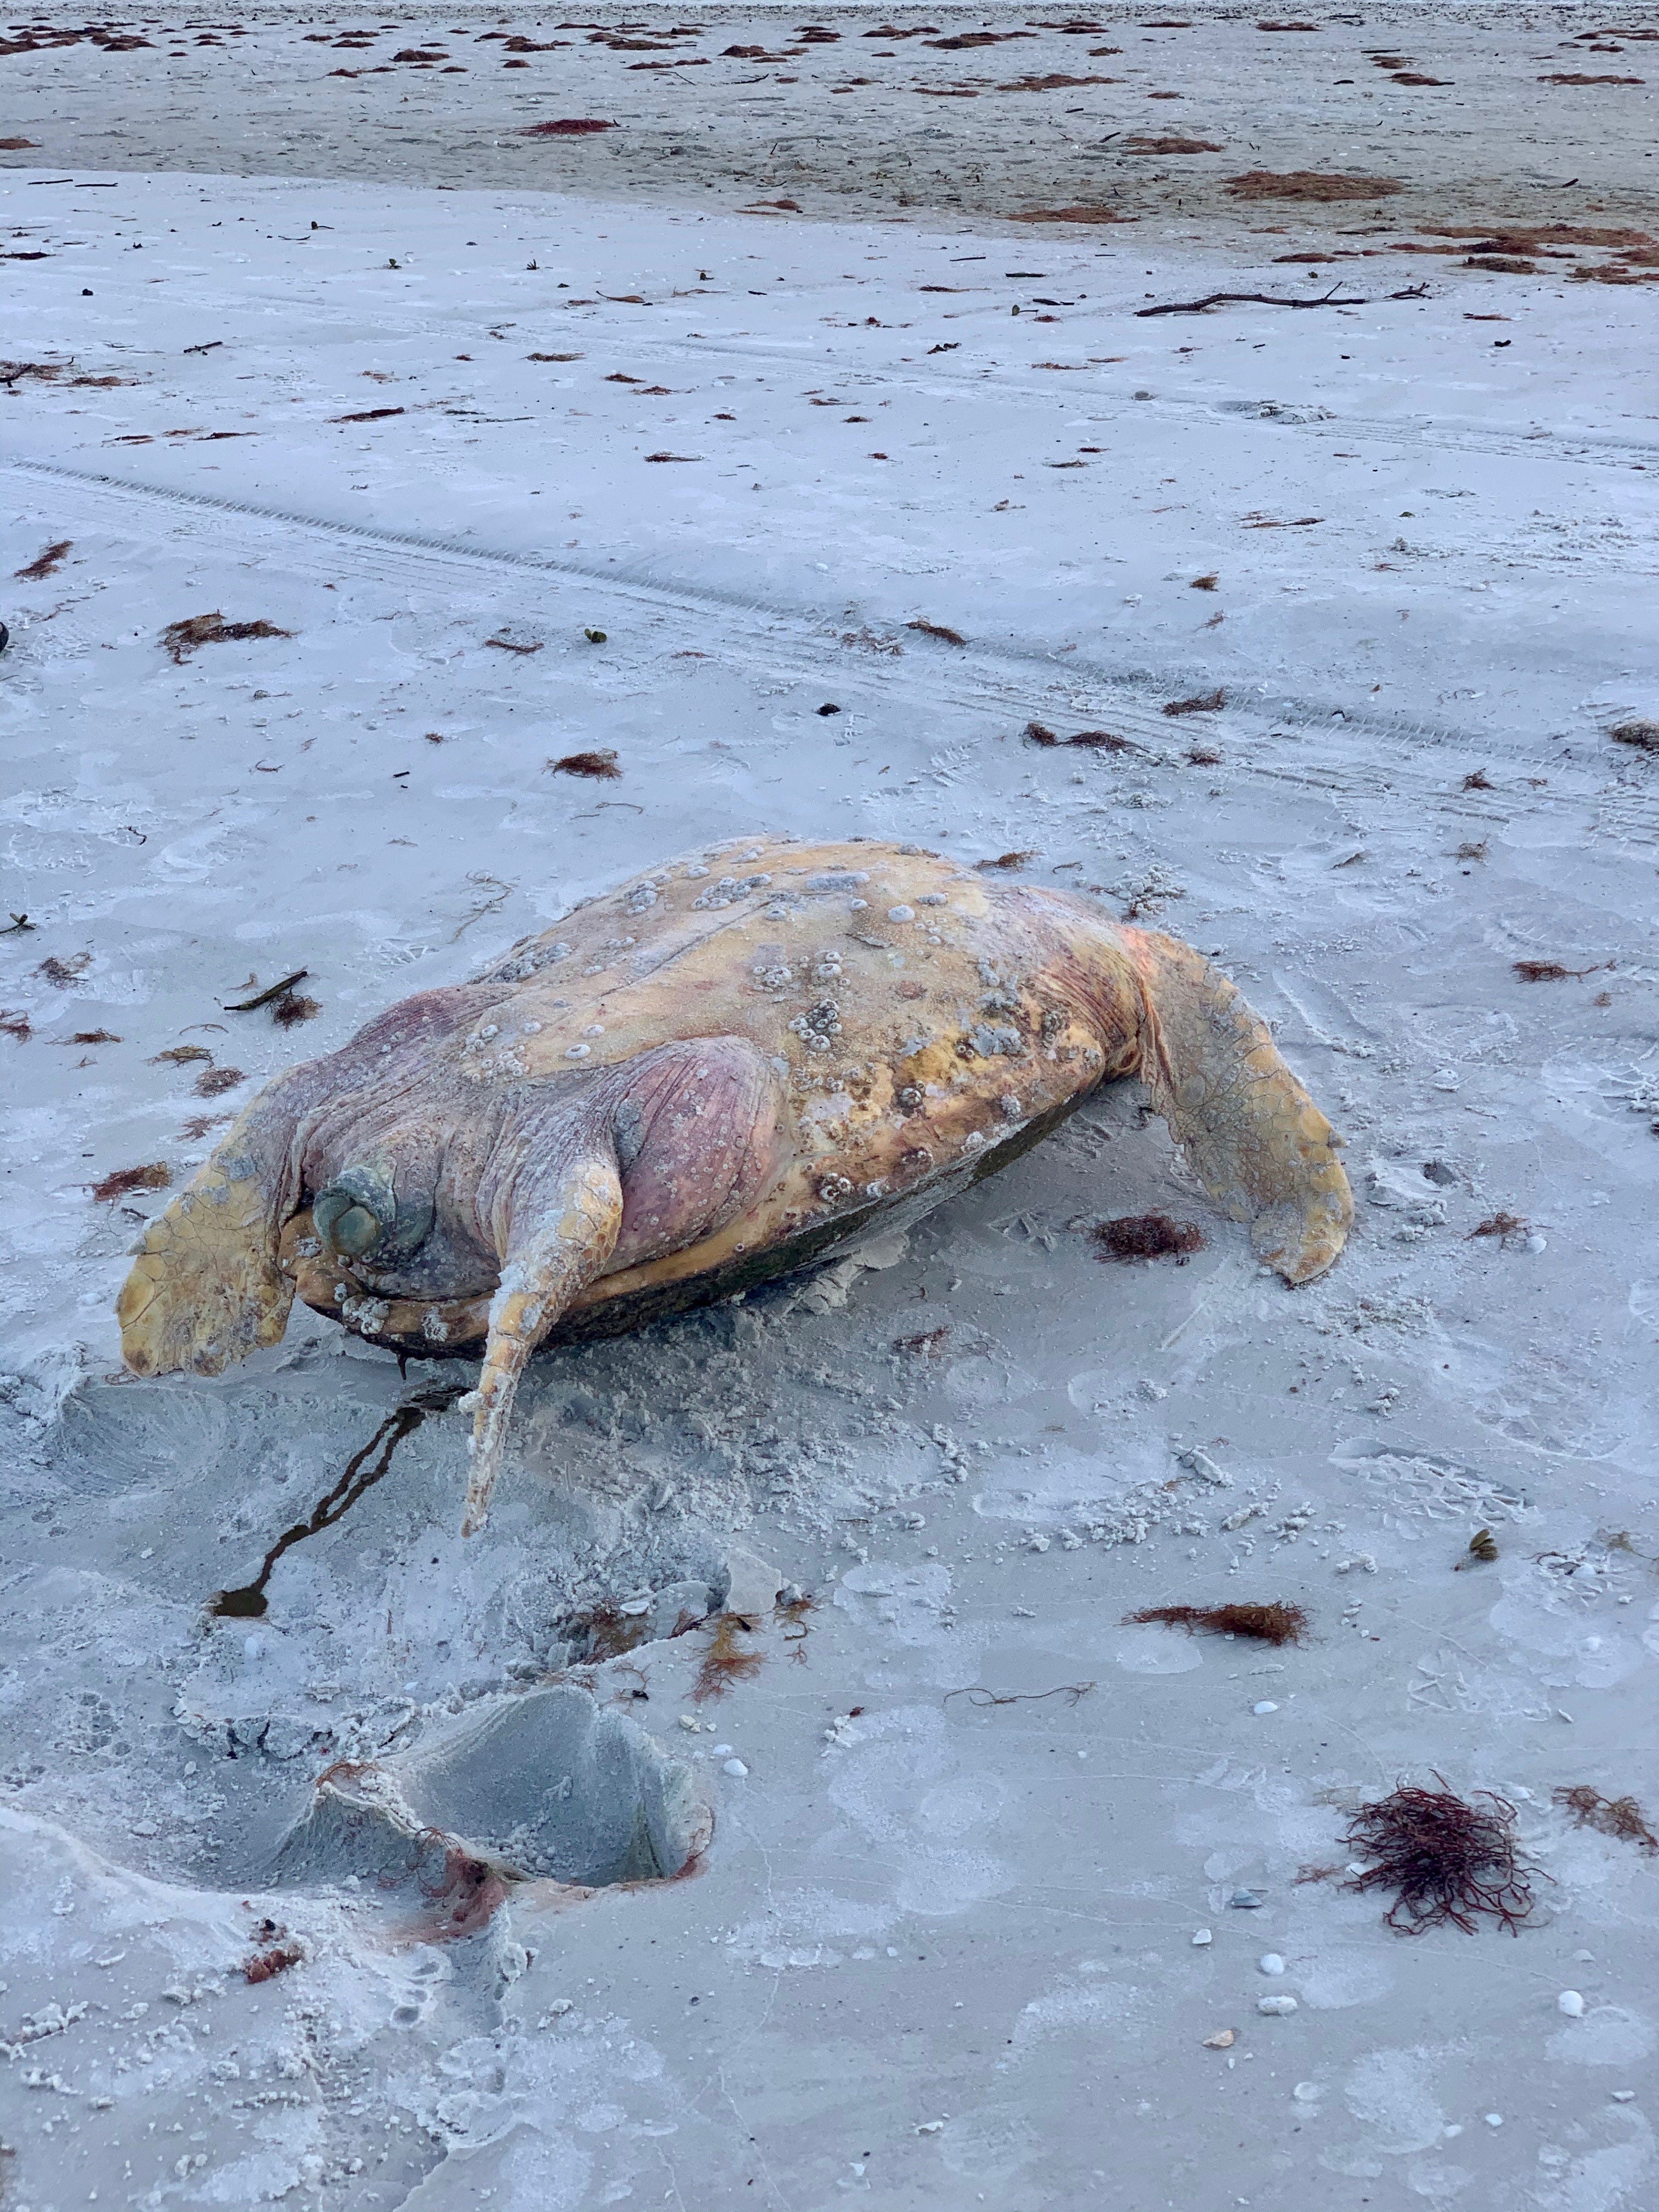 Joanna D. Metzger, a Marco Island resident, said she saw a dead loggerhead turtle that washed ashore close to the JW Marriott Beach Resort during a morning walk on Oct. 17. " It is very distressing especially after what we witnessed in 2018, " Metzger said referring to the red tide event of last year.